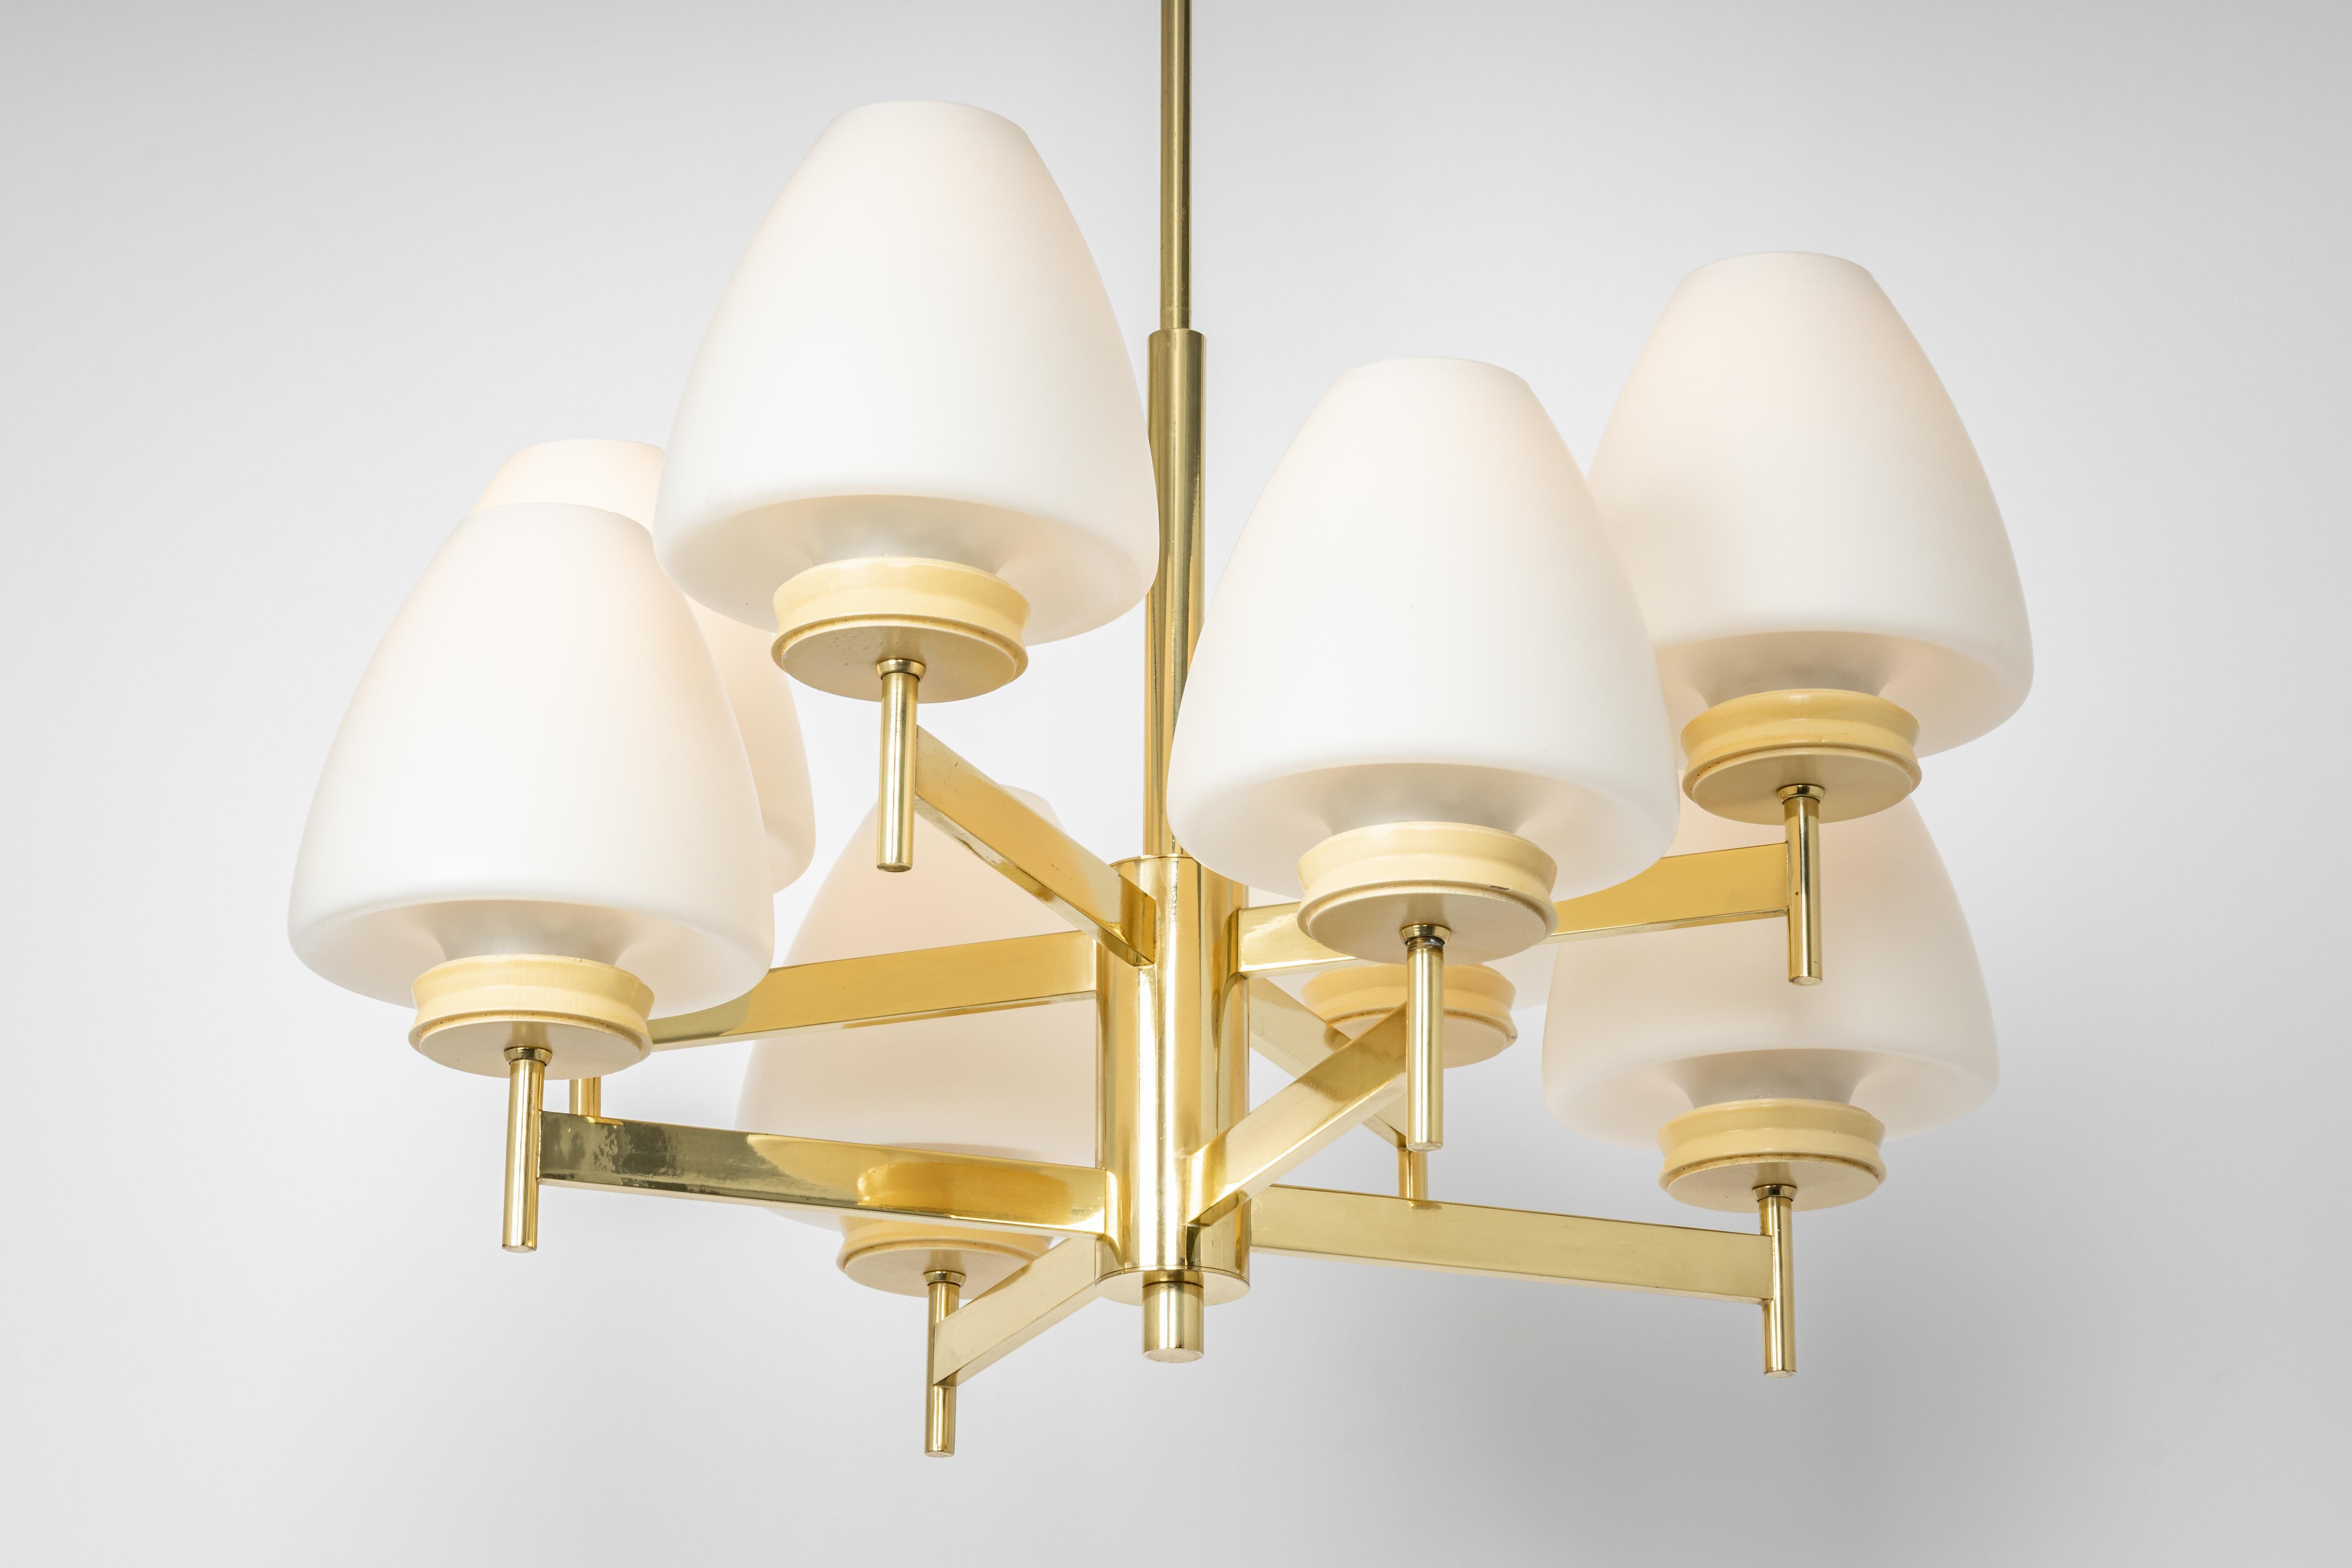 Brass Stunning Sputnik Chandelier with Opal Glasses by Kaiser, Germany, 1970s For Sale